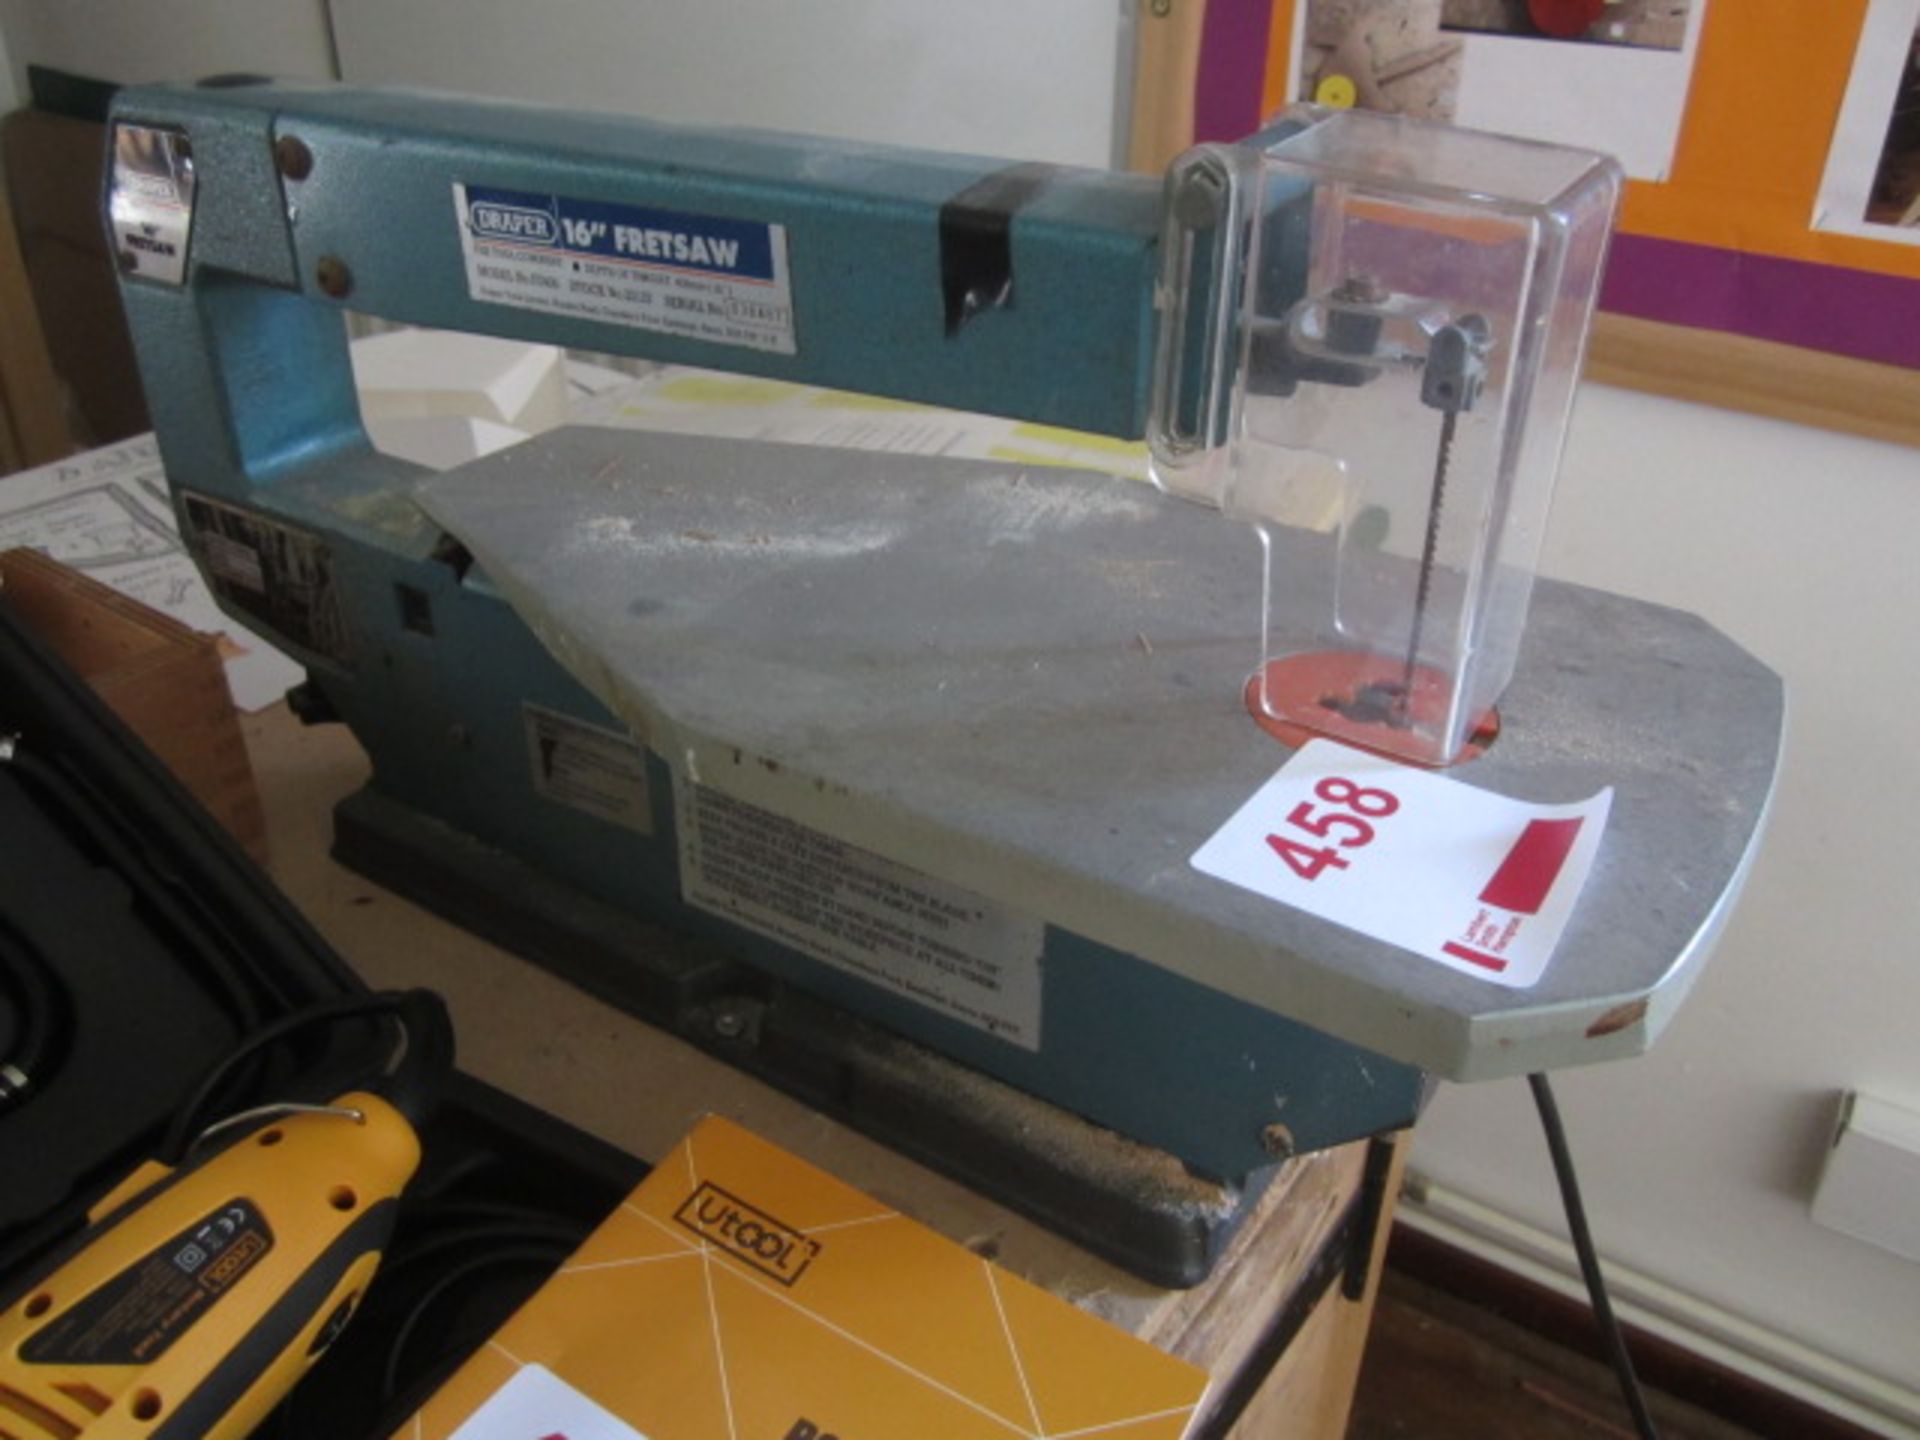 Draper FS400 16" bench top fret saw, 240v. Located at Church FarmPlease note: This lot, for VAT